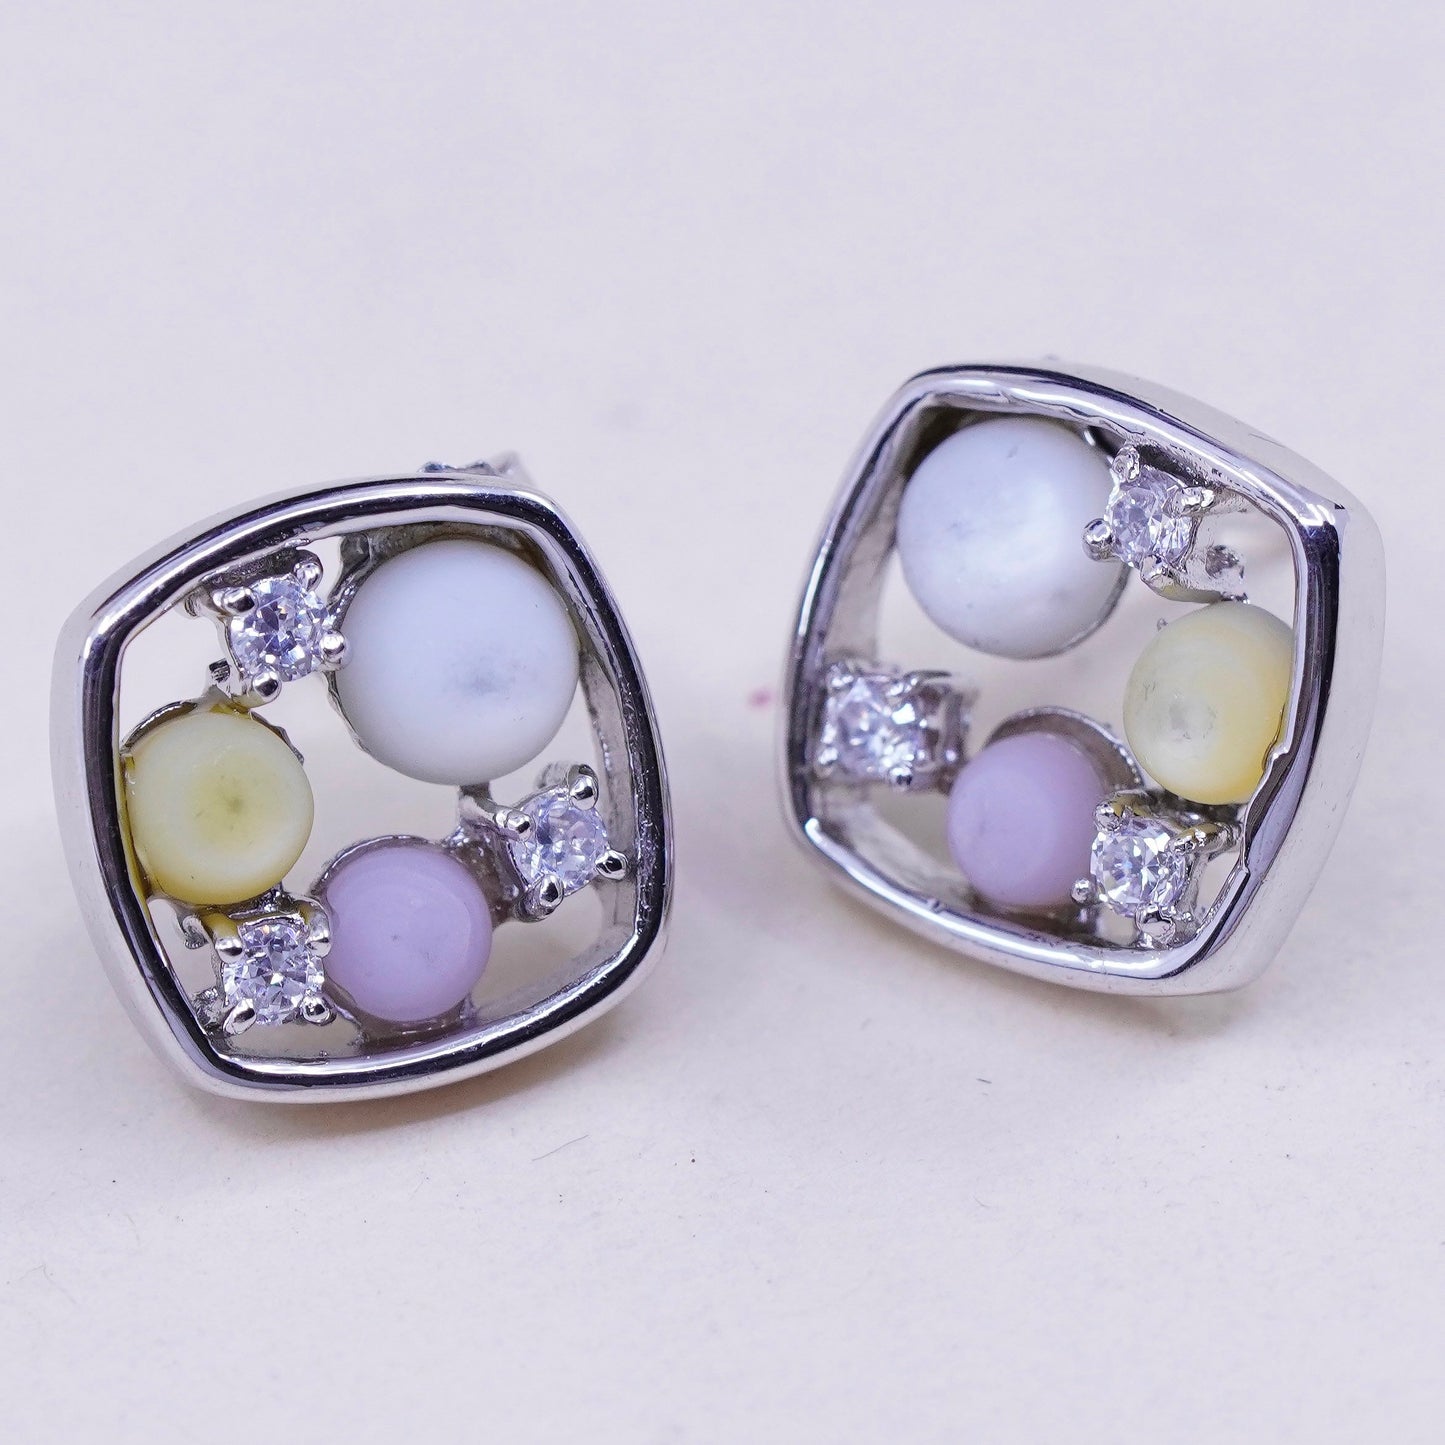 Vintage sterling 925 silver studs, square earrings with moonstone and cz